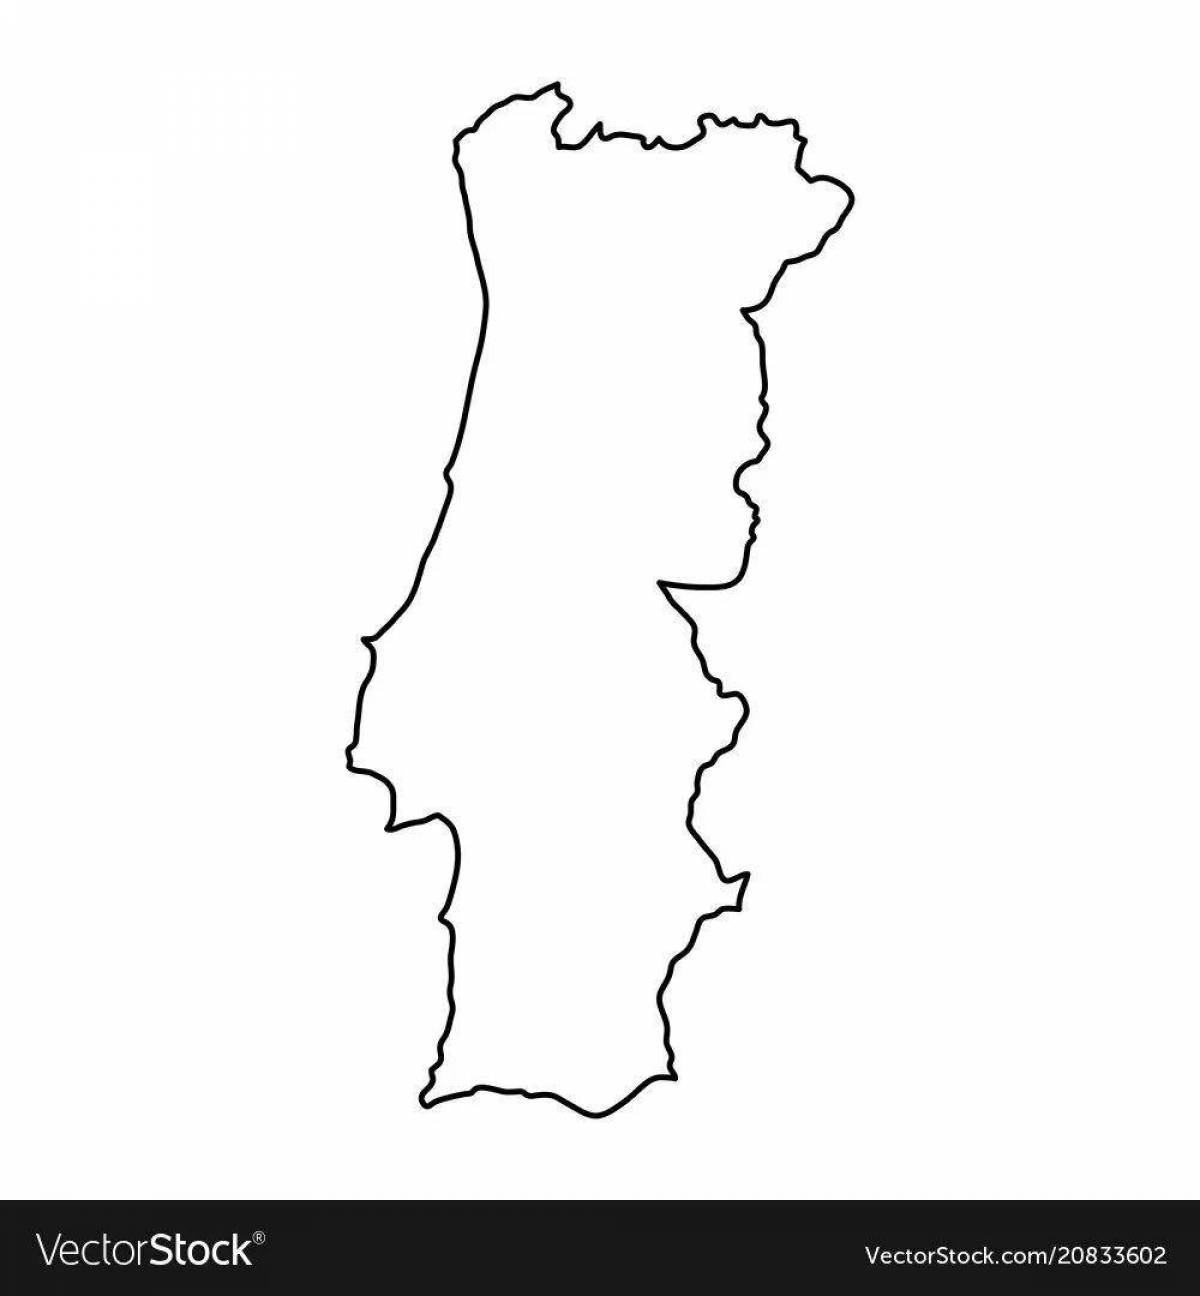 Coloring page inviting portugal